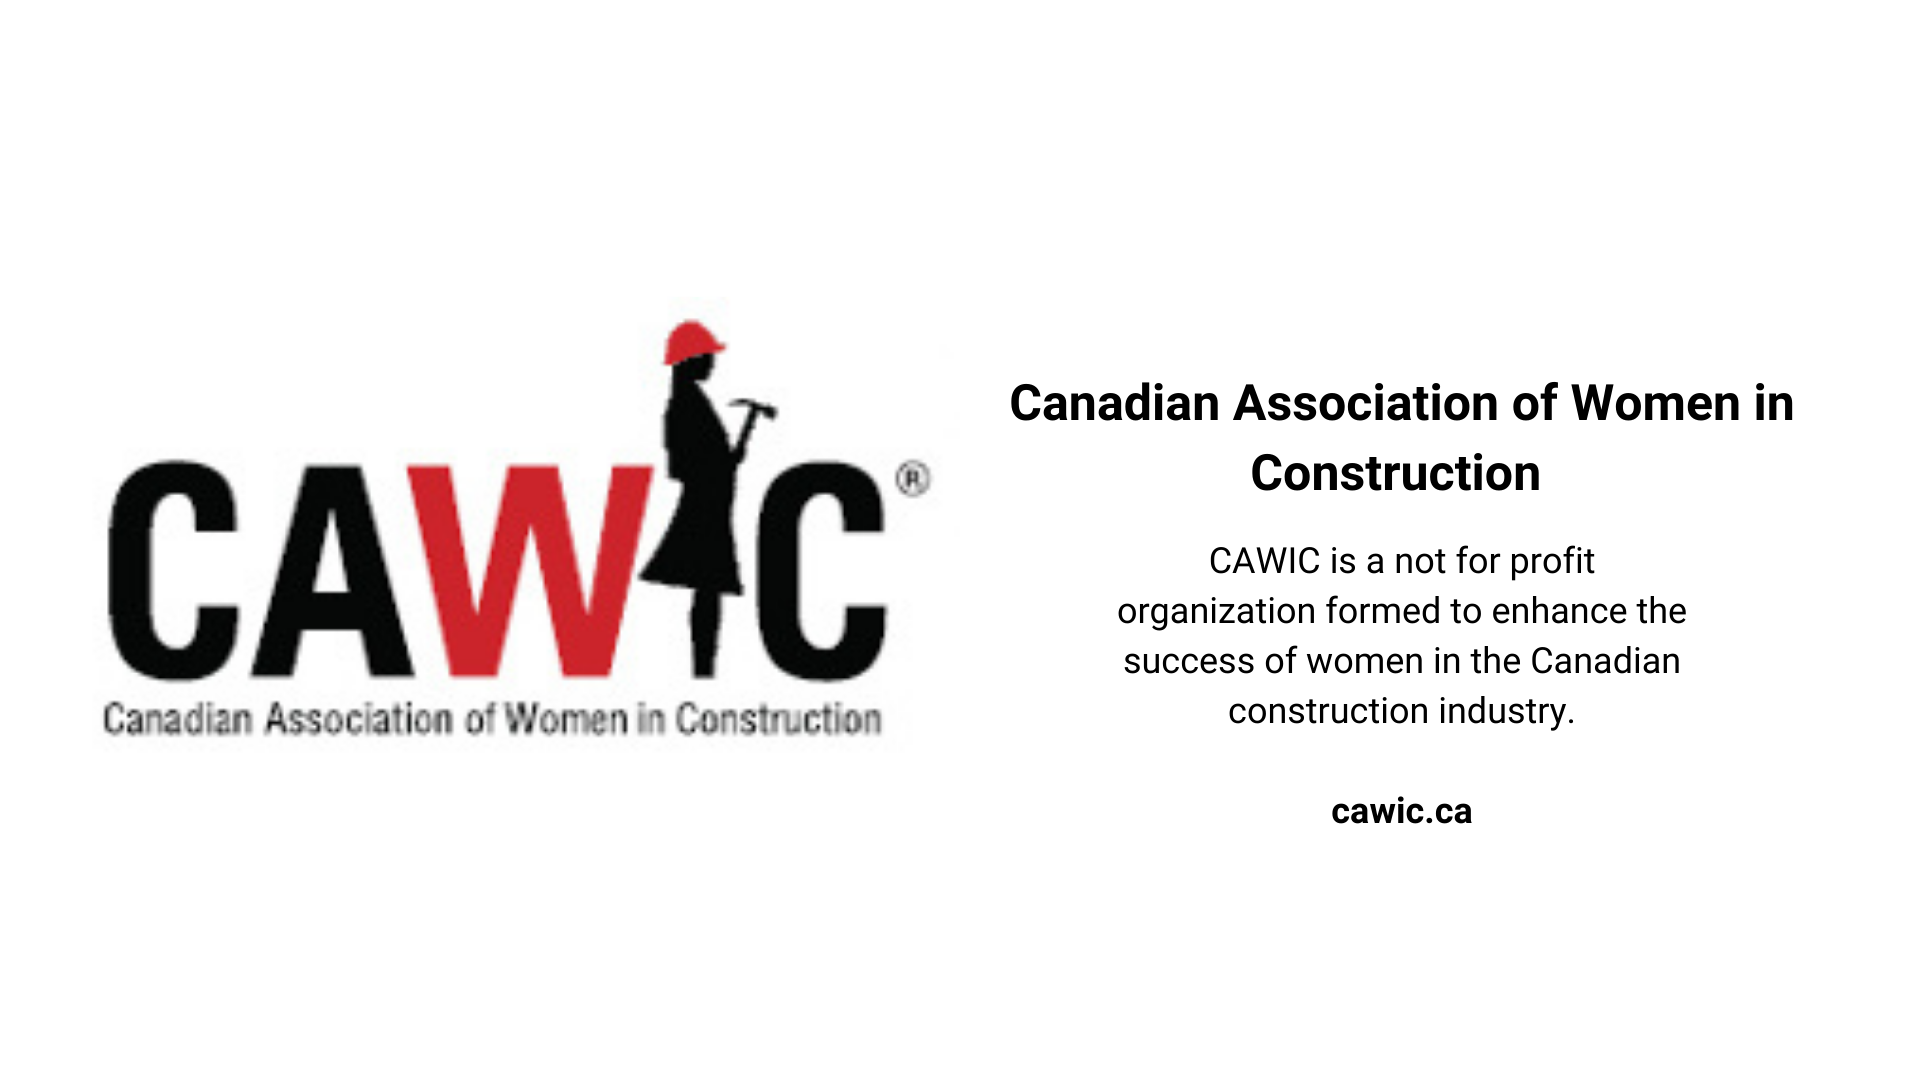 The Canadian Association of Women in Construction 